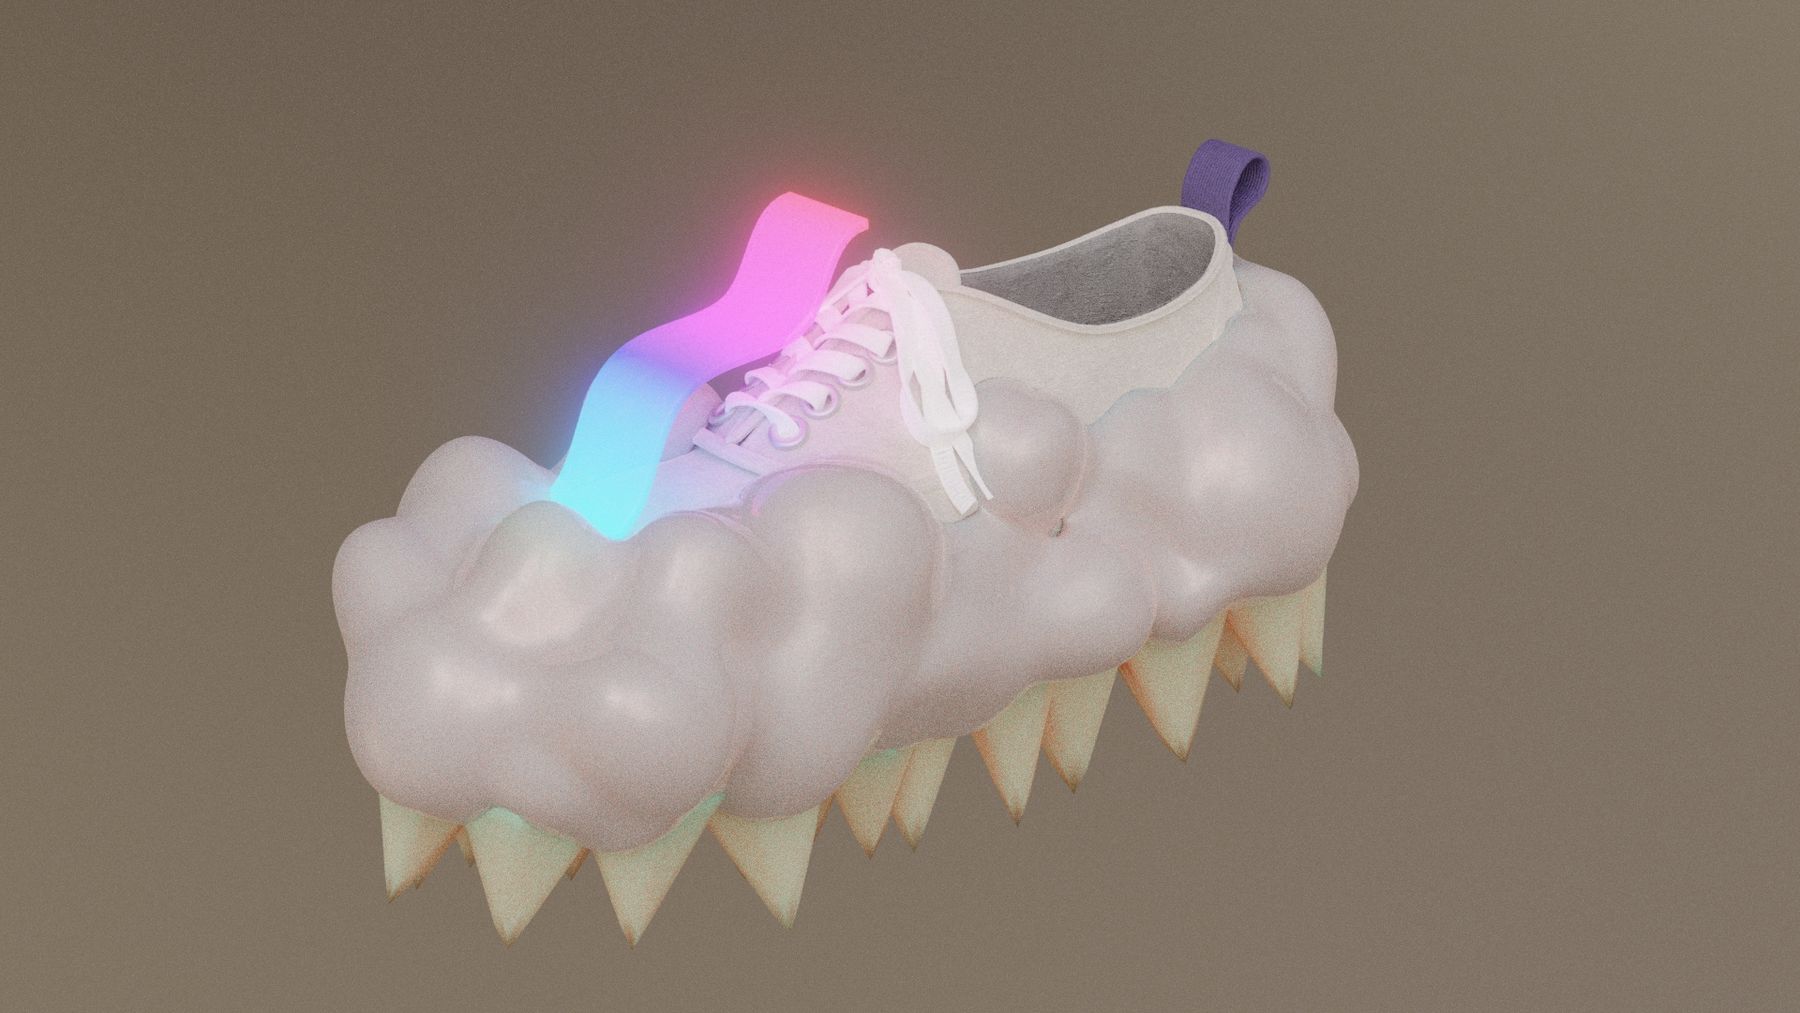 a render of augmented reality shoes